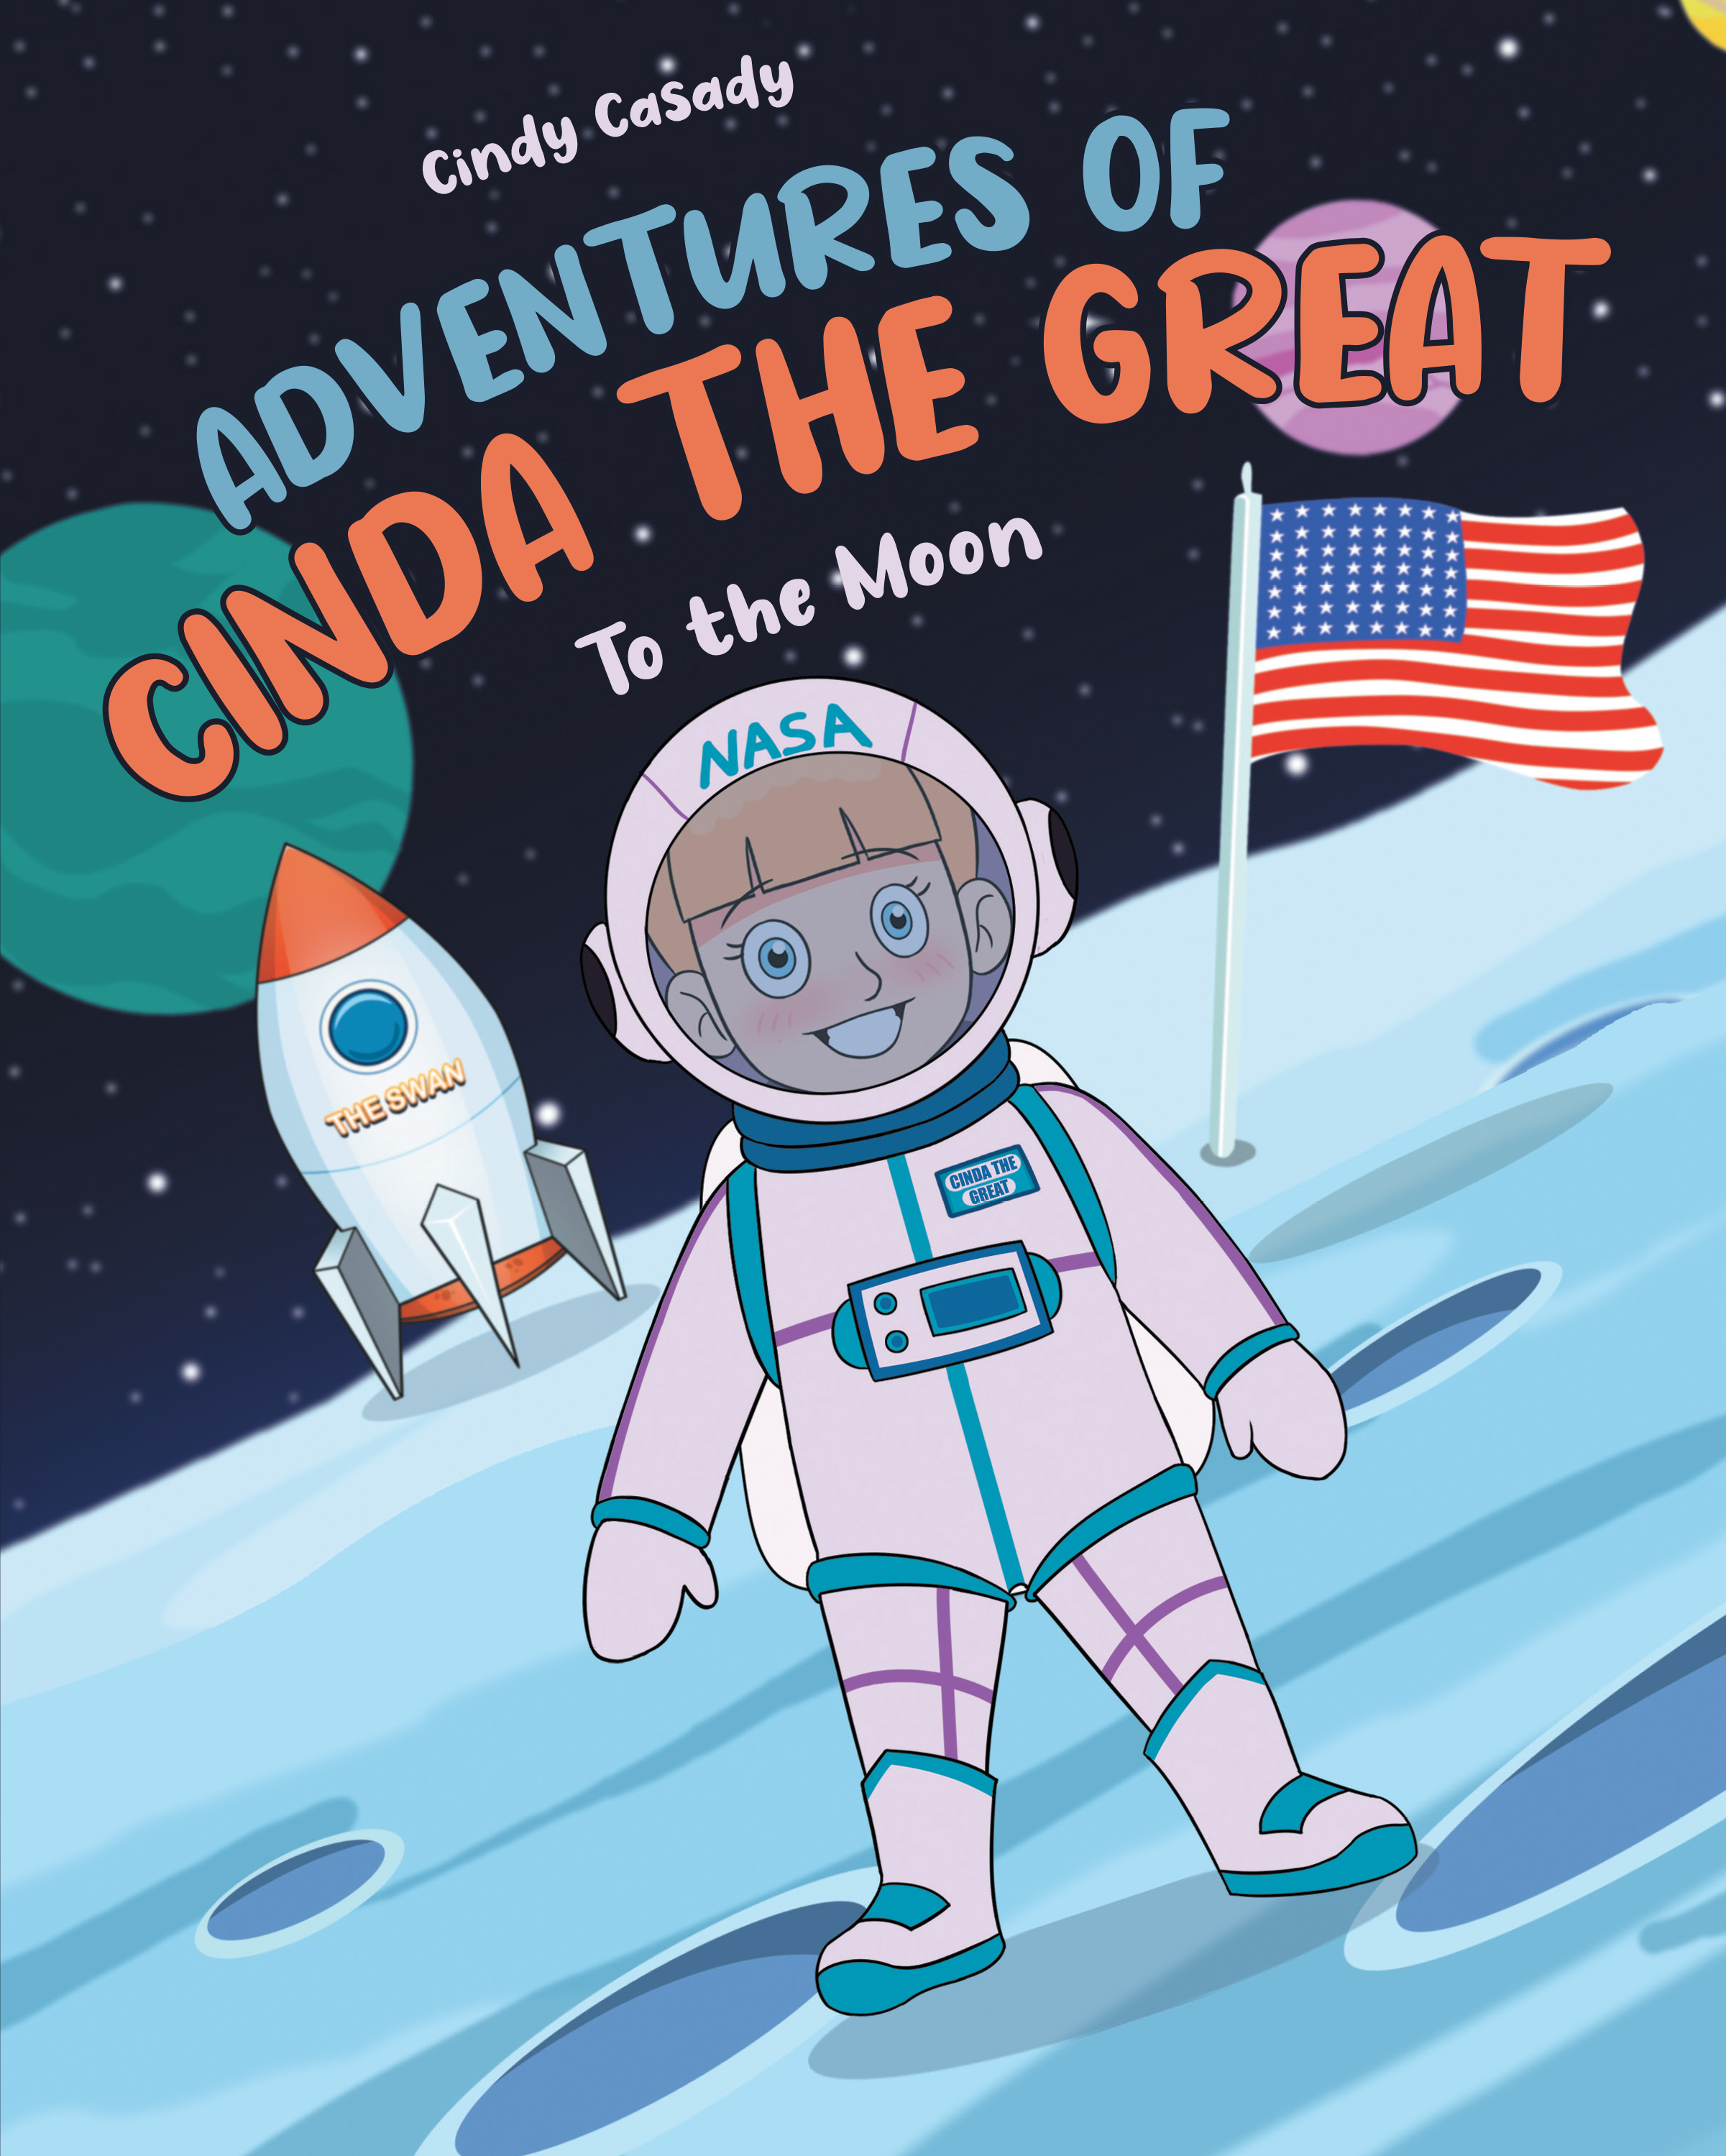 Author Cindy Casady’s New Book, “Adventures of Cinda the Great: To the Moon,” is a Riveting Story of One Girl’s Incredible Journey Using Her Imagination